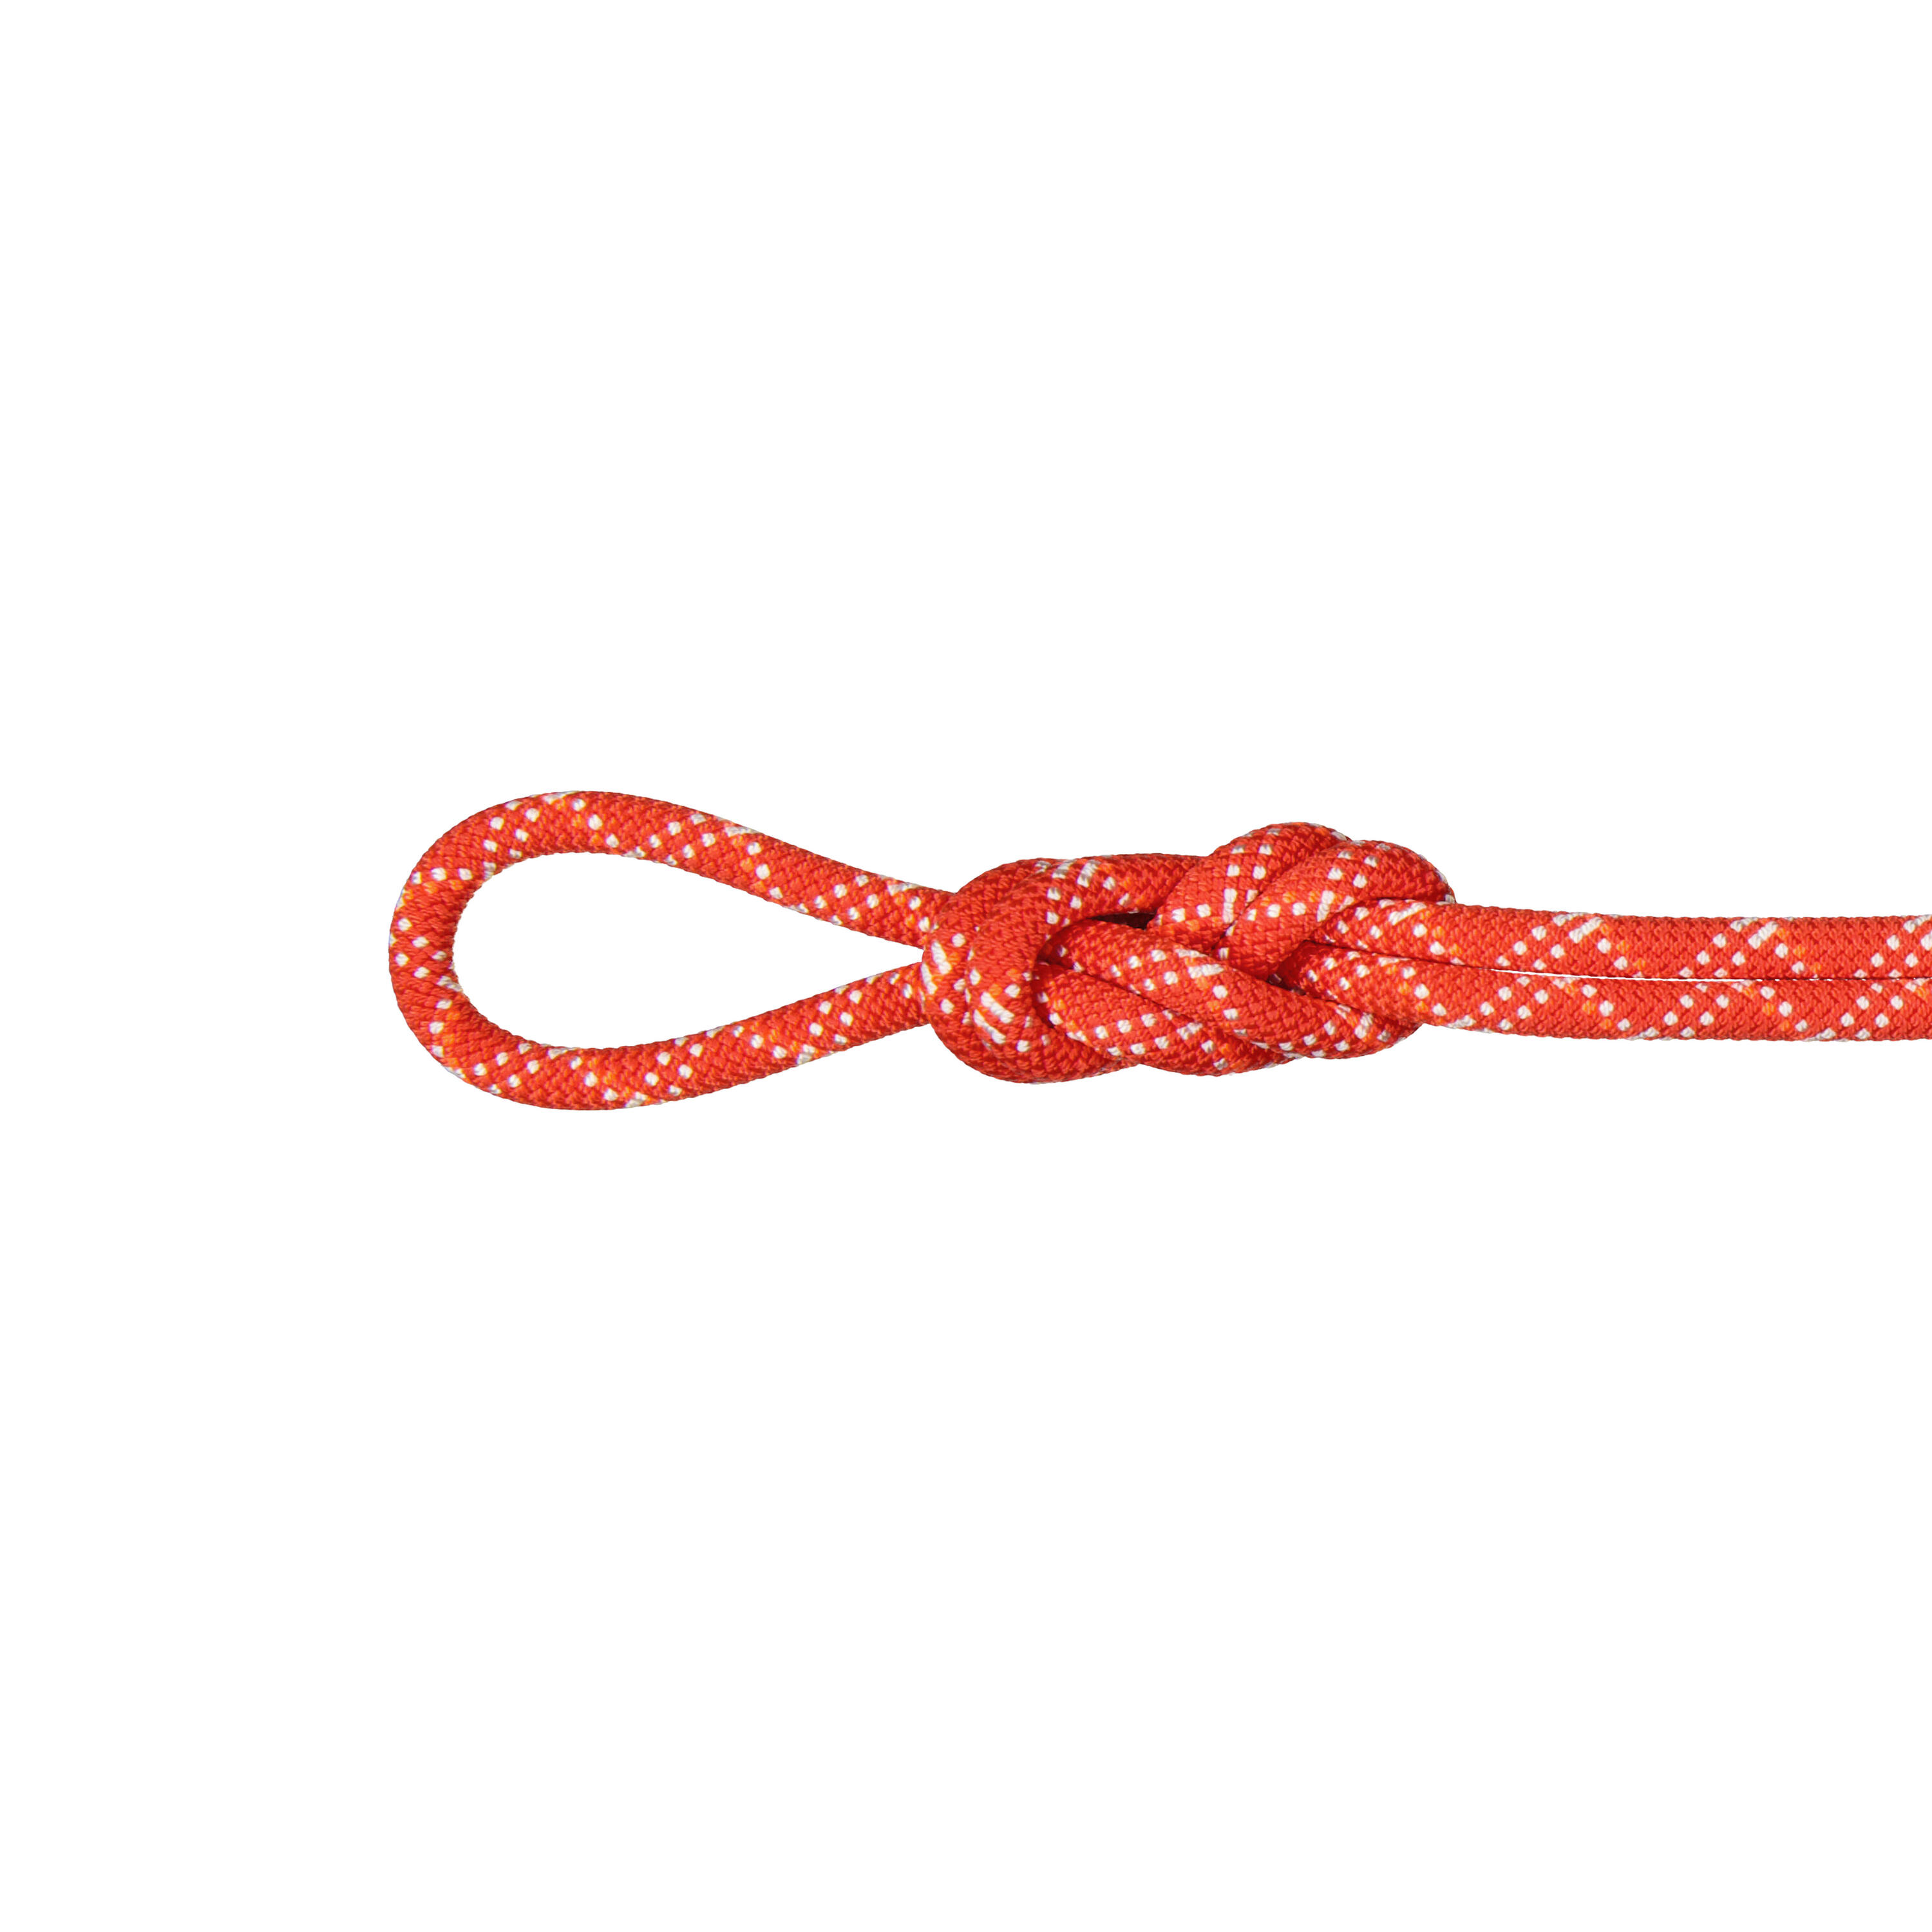 MAMMUT Gym Classic Single Rope 9.5 mm x 40m - Red